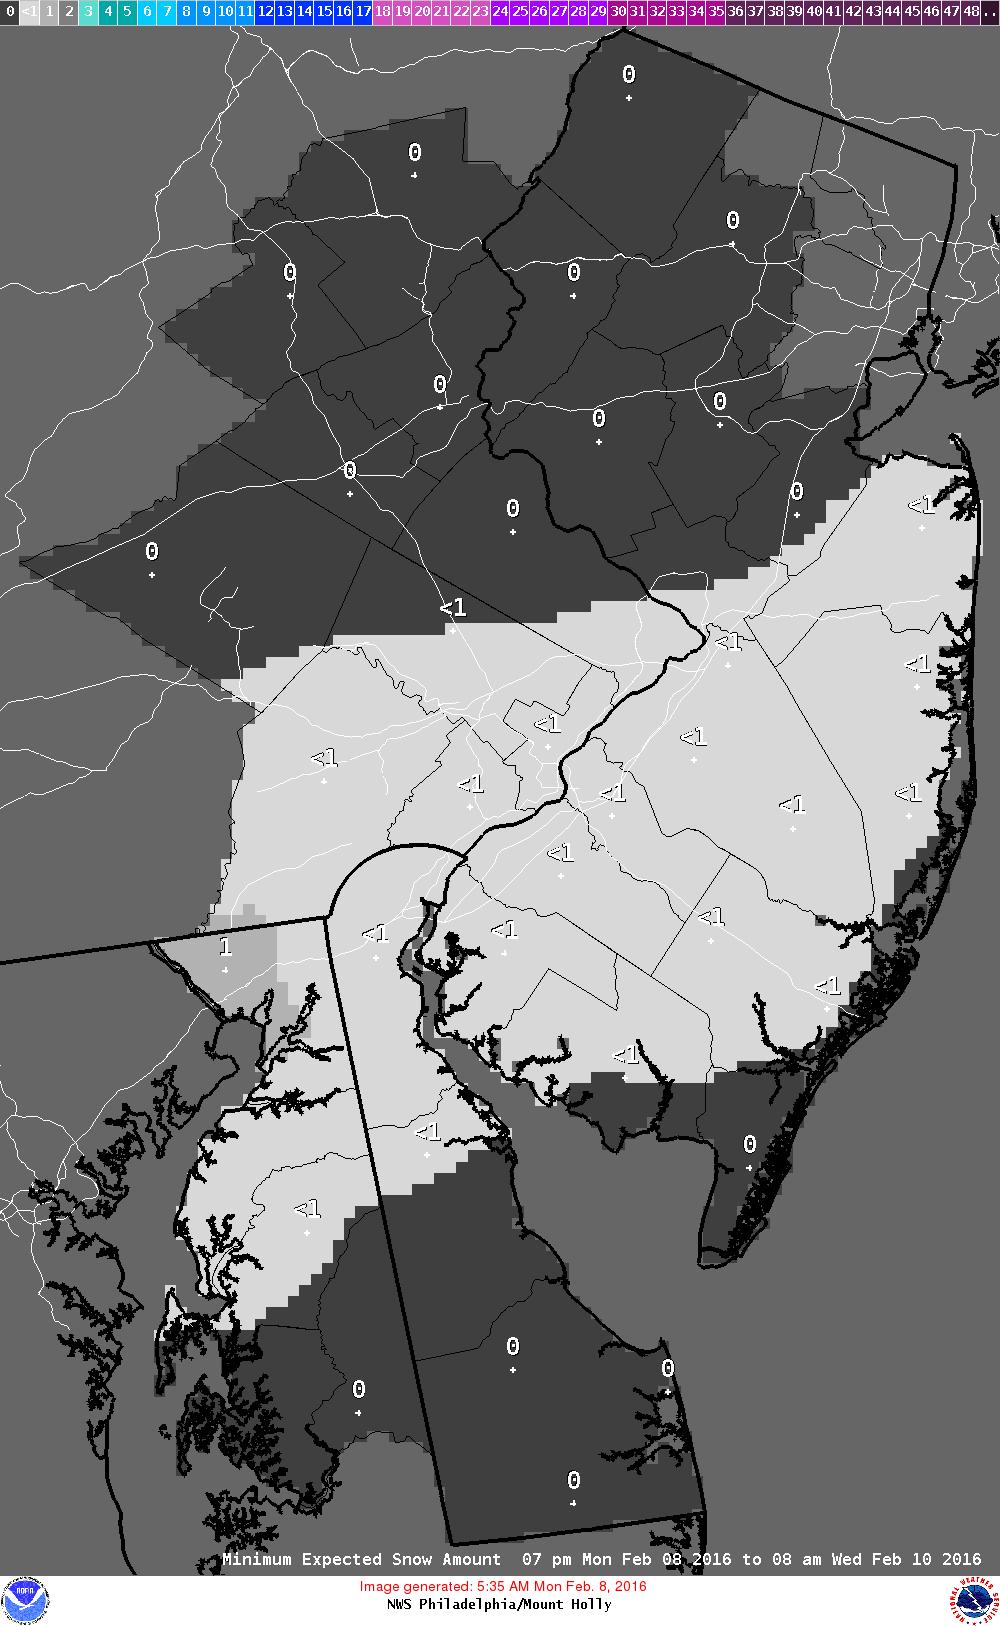 maximum (right) snowfall amounts from this event based on statistical analysis of model guidance.